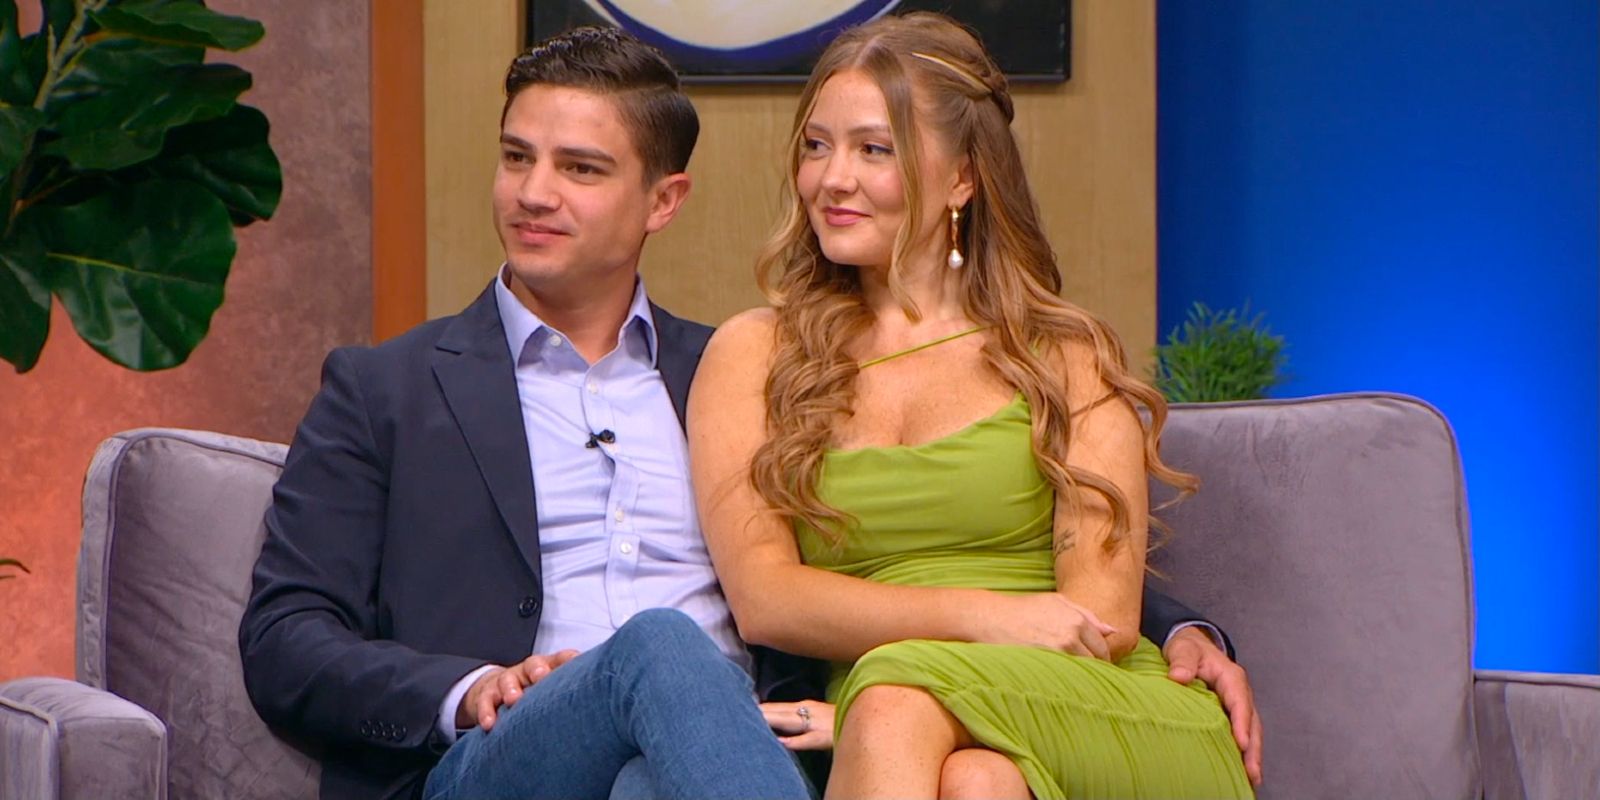 Kara Bass and Guillermo Rojer at the 90 Day Fiancé Season 9 Tell All smiling and holding each other